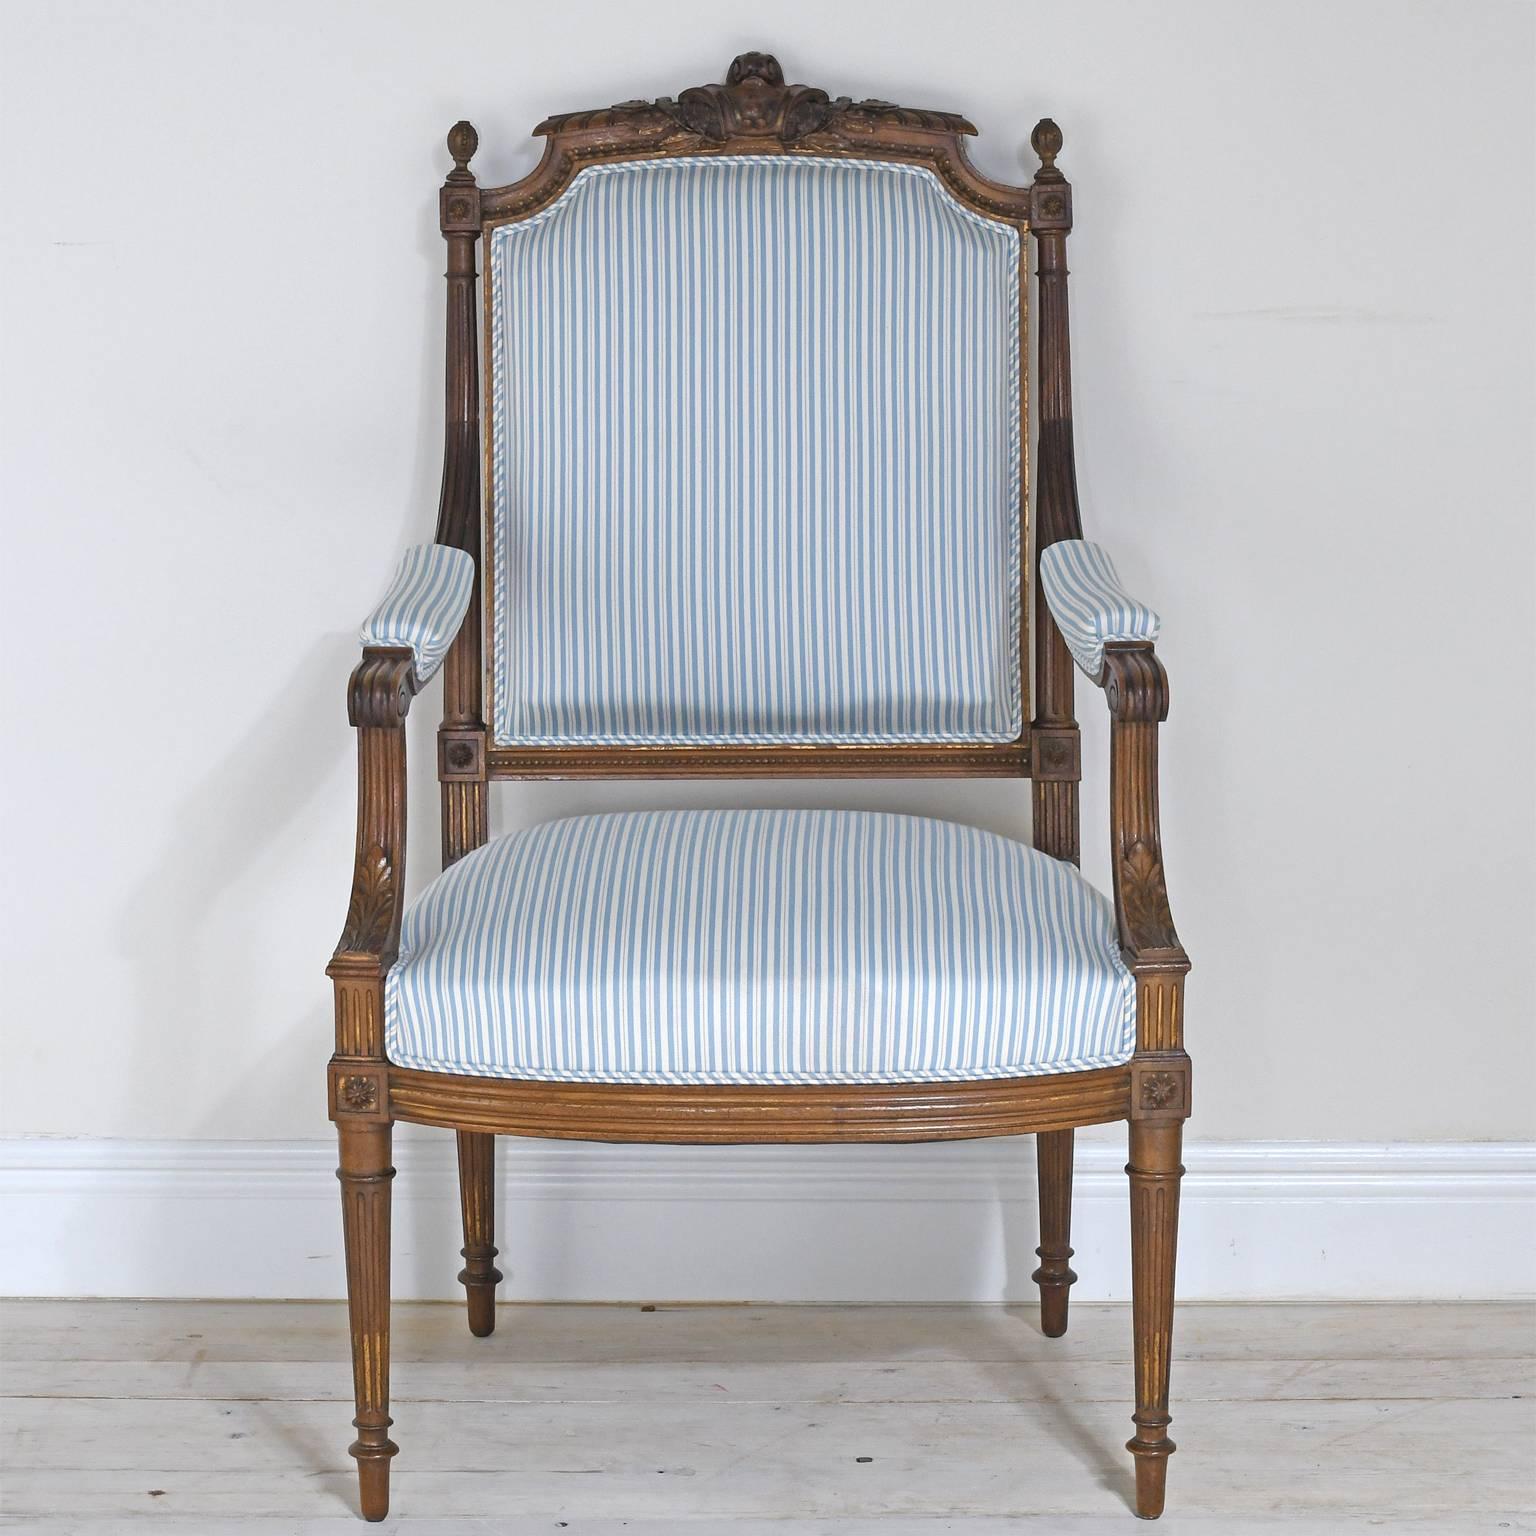 A very lovely pair of Louis XVI style French fauteuils with walnut frames offering well-articulated carvings which include a carved back crest with a cartouche flanked by oak leaves, scepter finials, boss rosettes, acanthus leaves on arm supports,